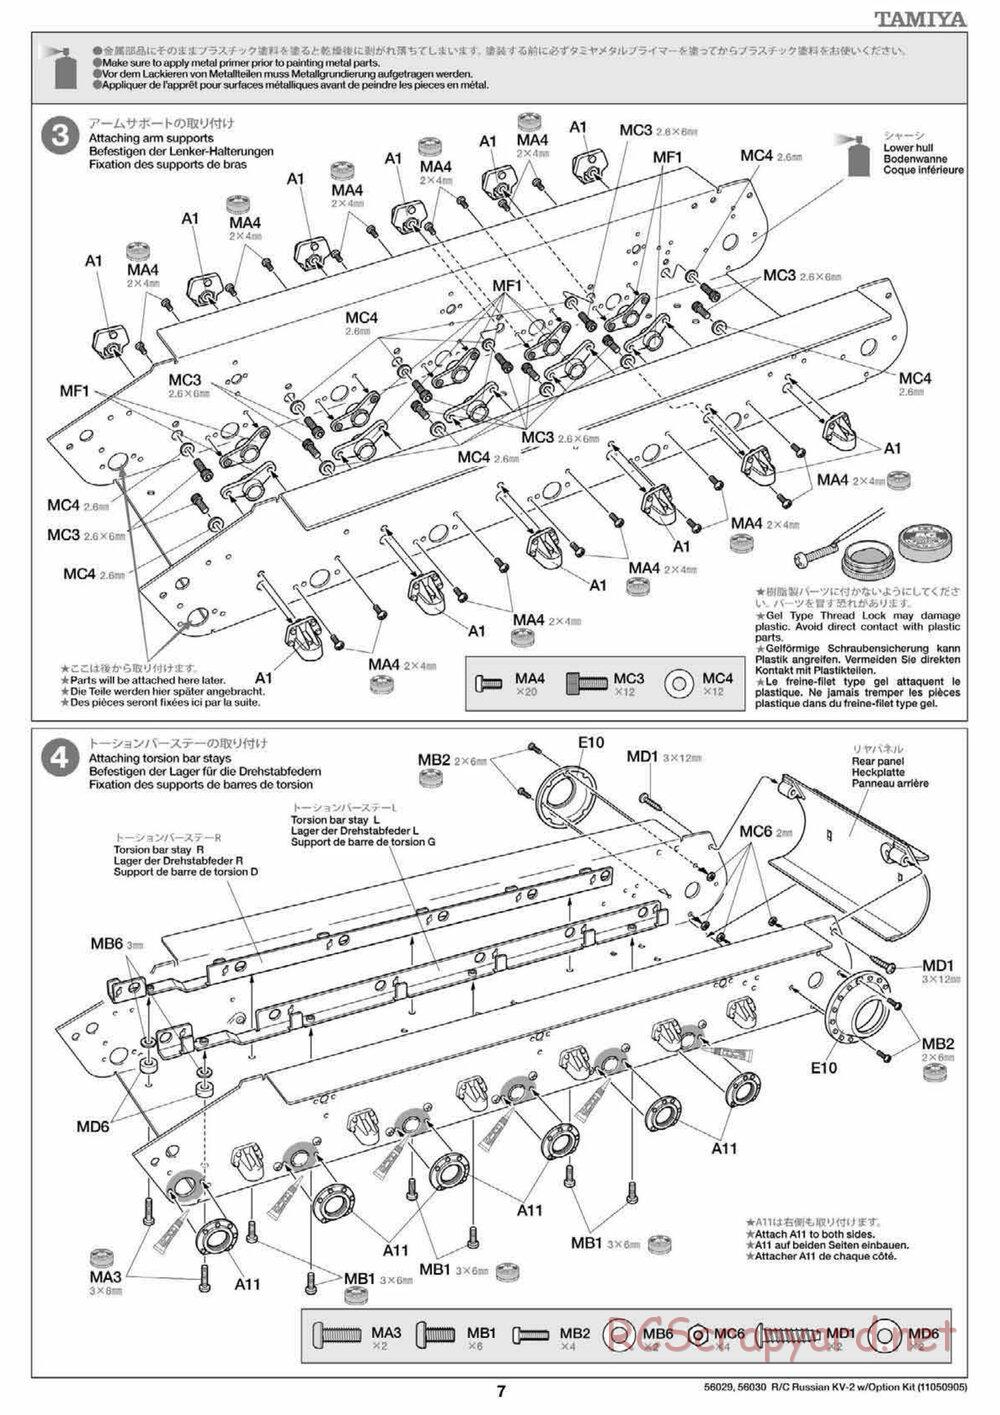 Tamiya - Russian Heavy Tank KV-2 Gigant - 1/16 Scale Chassis - Manual - Page 7